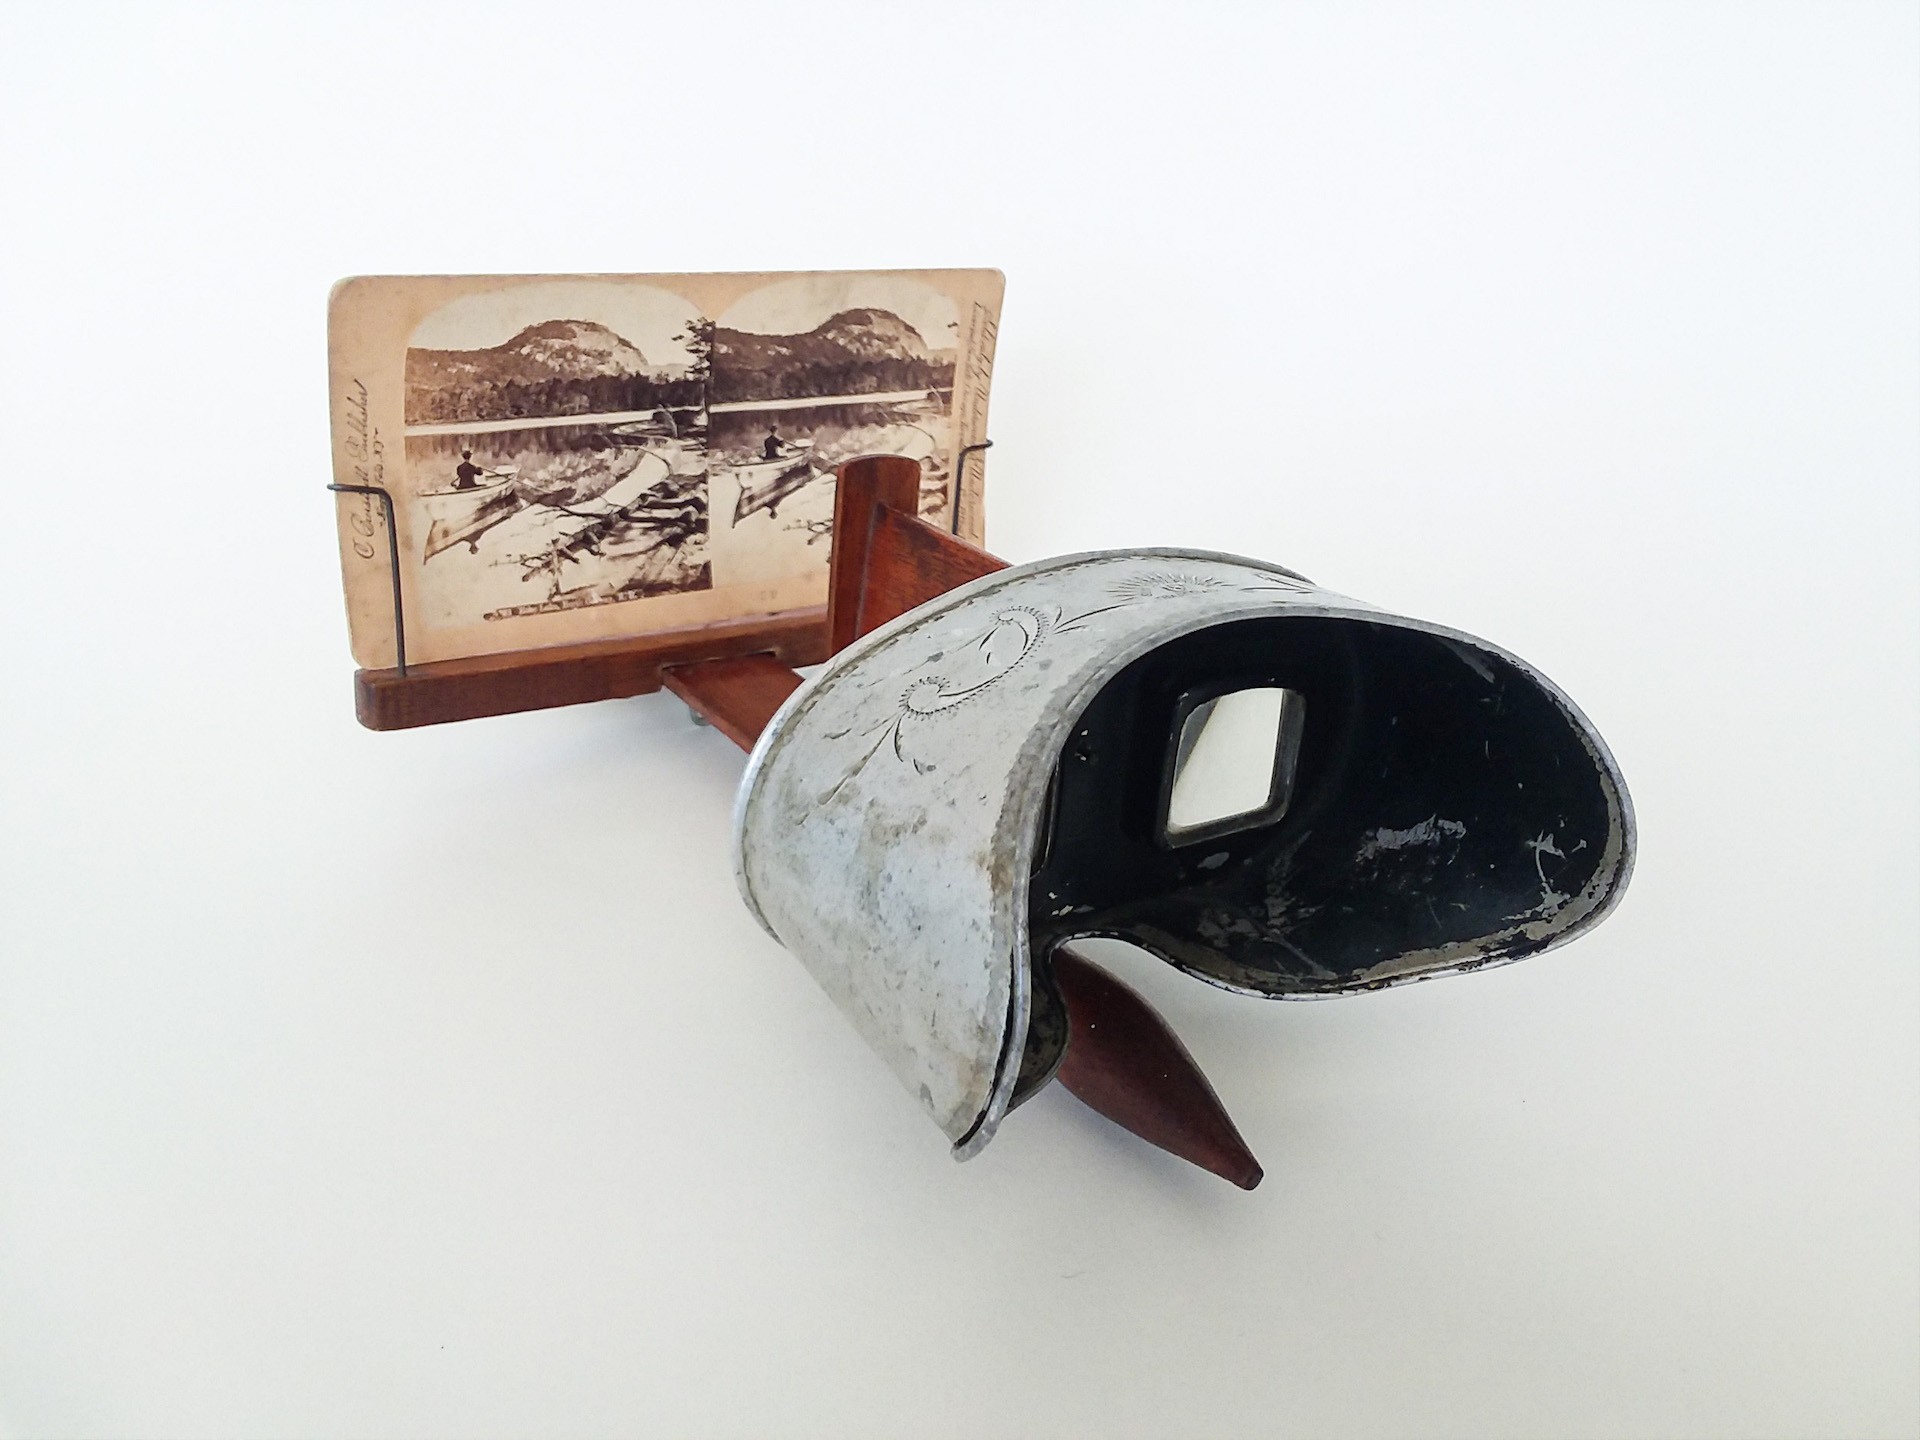 a stereograph set in a stereoscope for viewing